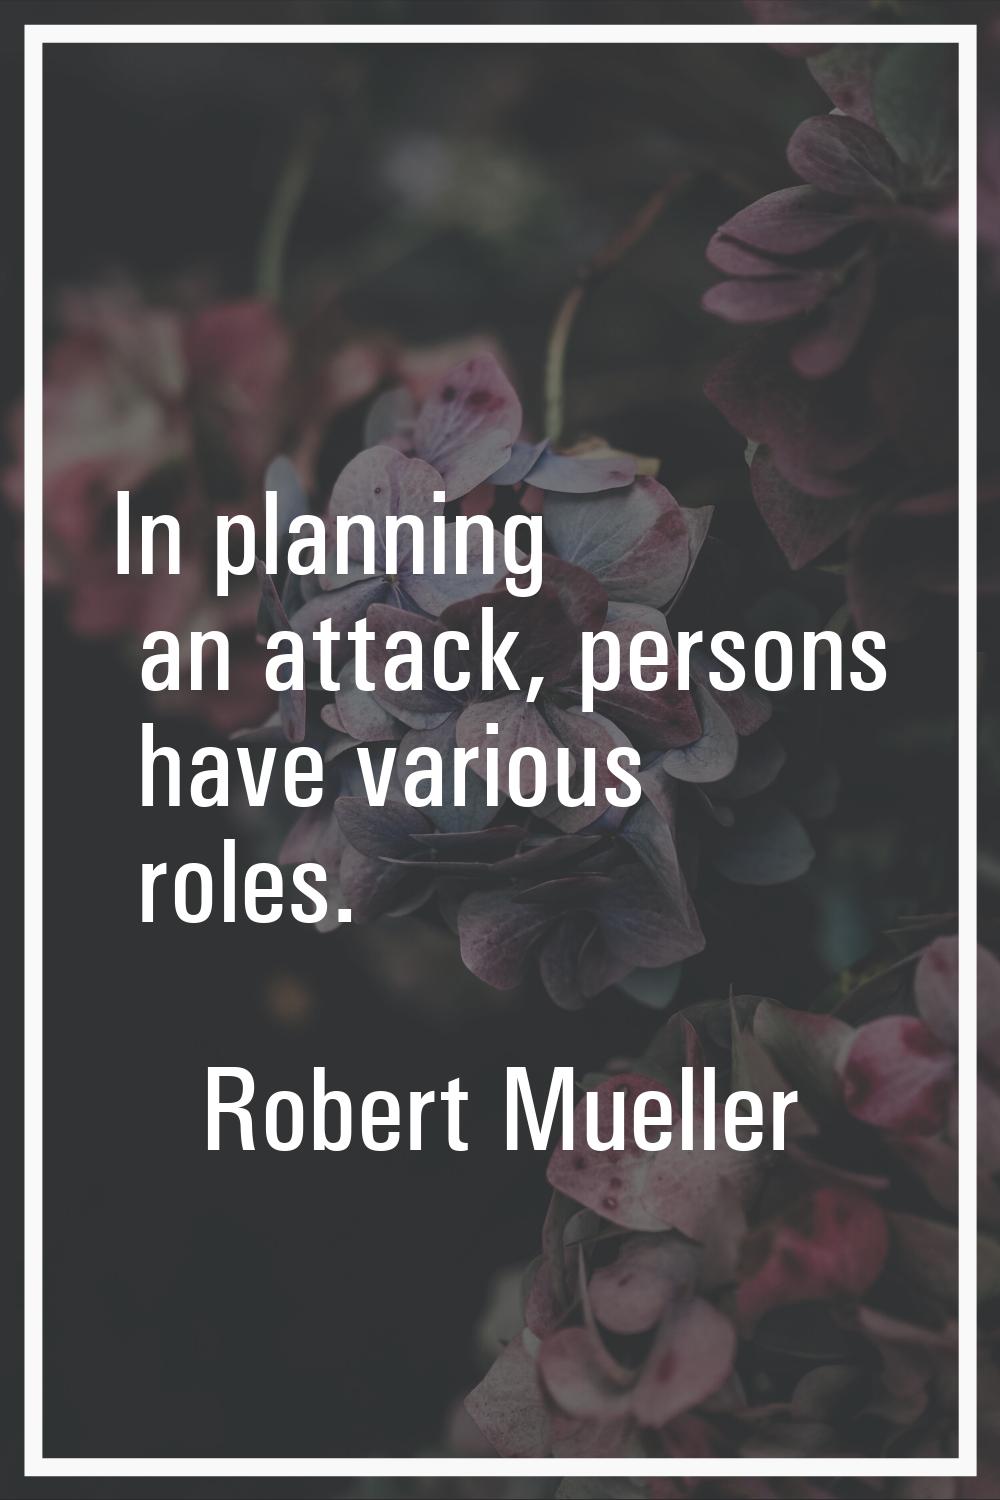 In planning an attack, persons have various roles.